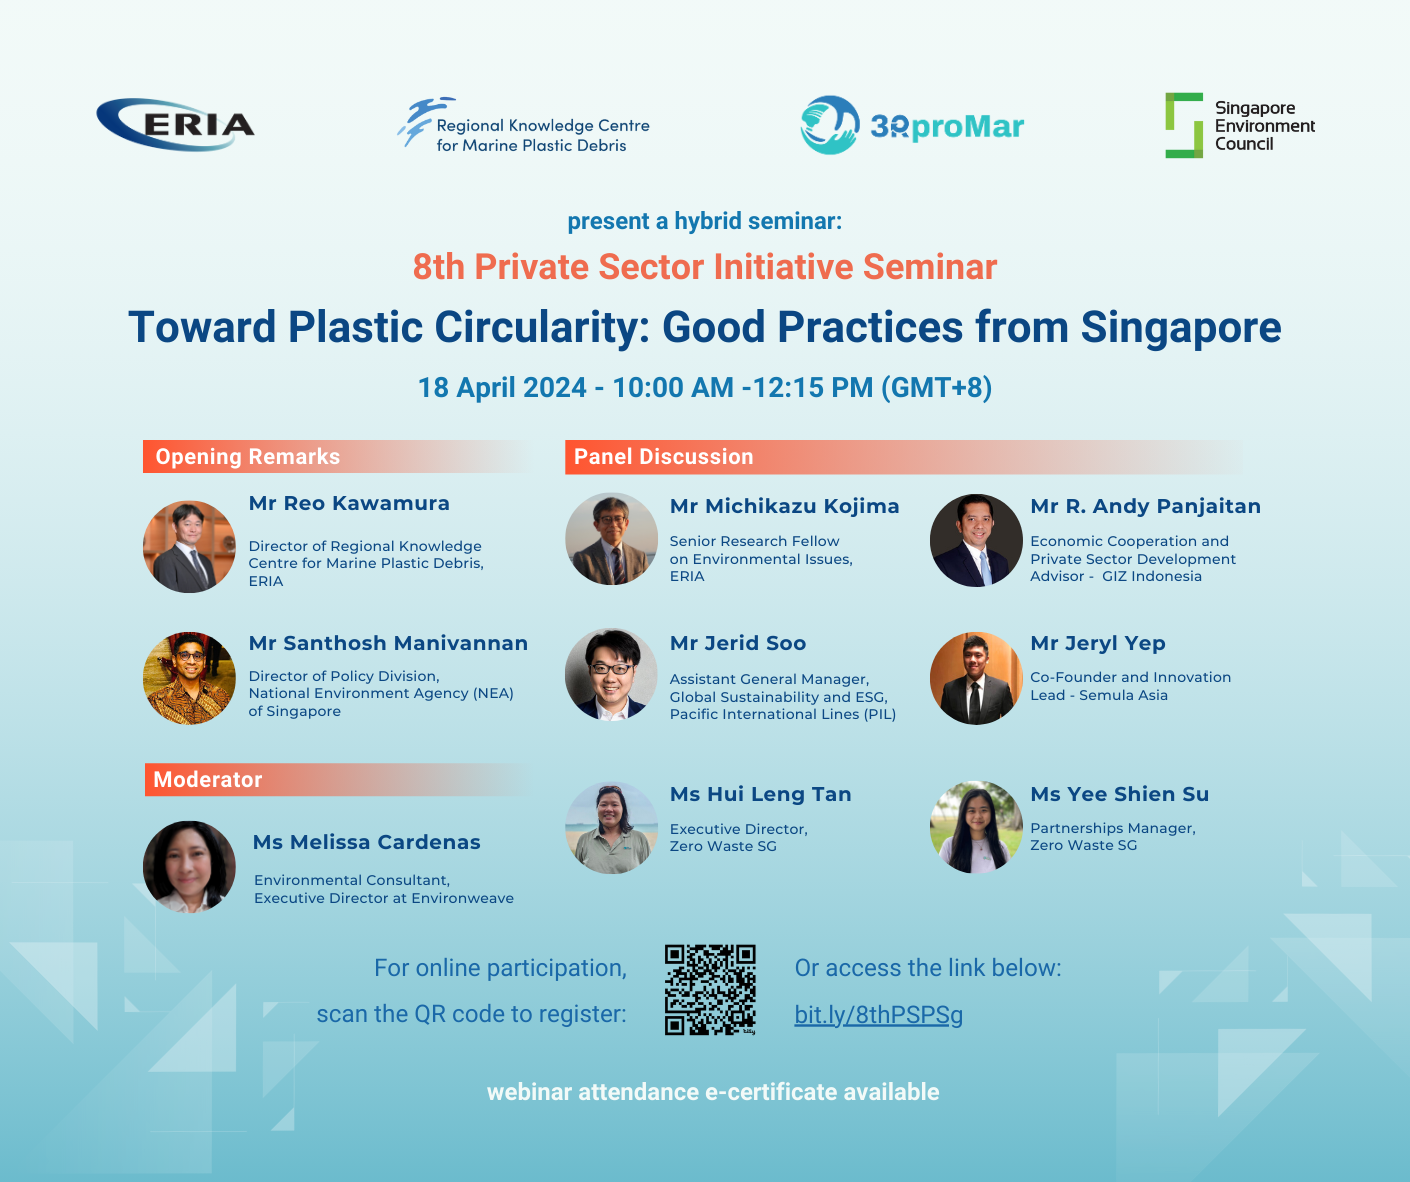 Private Sector Initiatives to Reduce Marine Plastics: Toward Plastic Circularity - Good Practices from Singapore